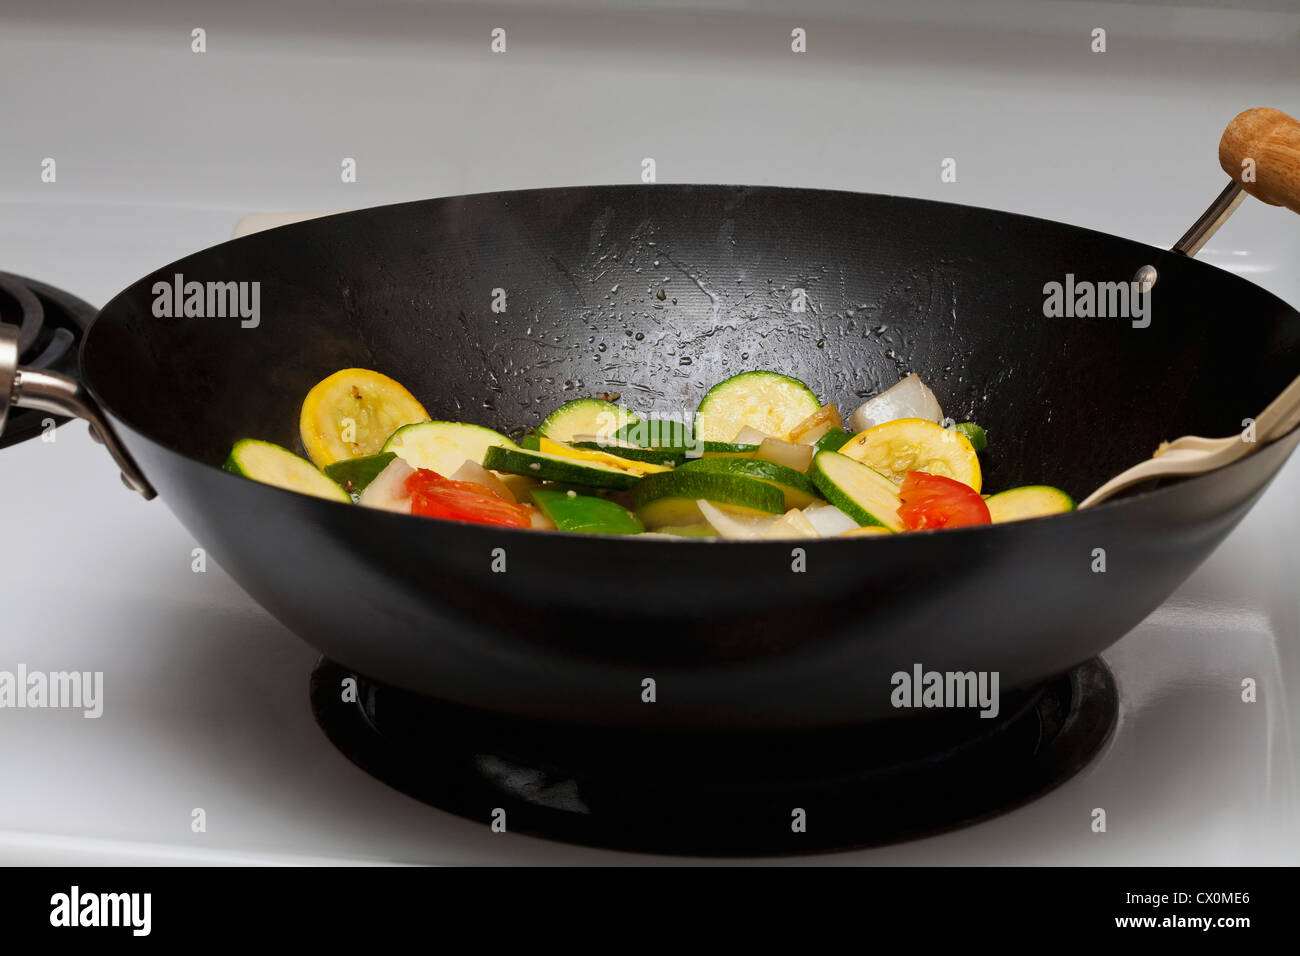 Yellow squash, zucchini, tomatoes, onions and garlic cooking in a Chinese wok. Stock Photo